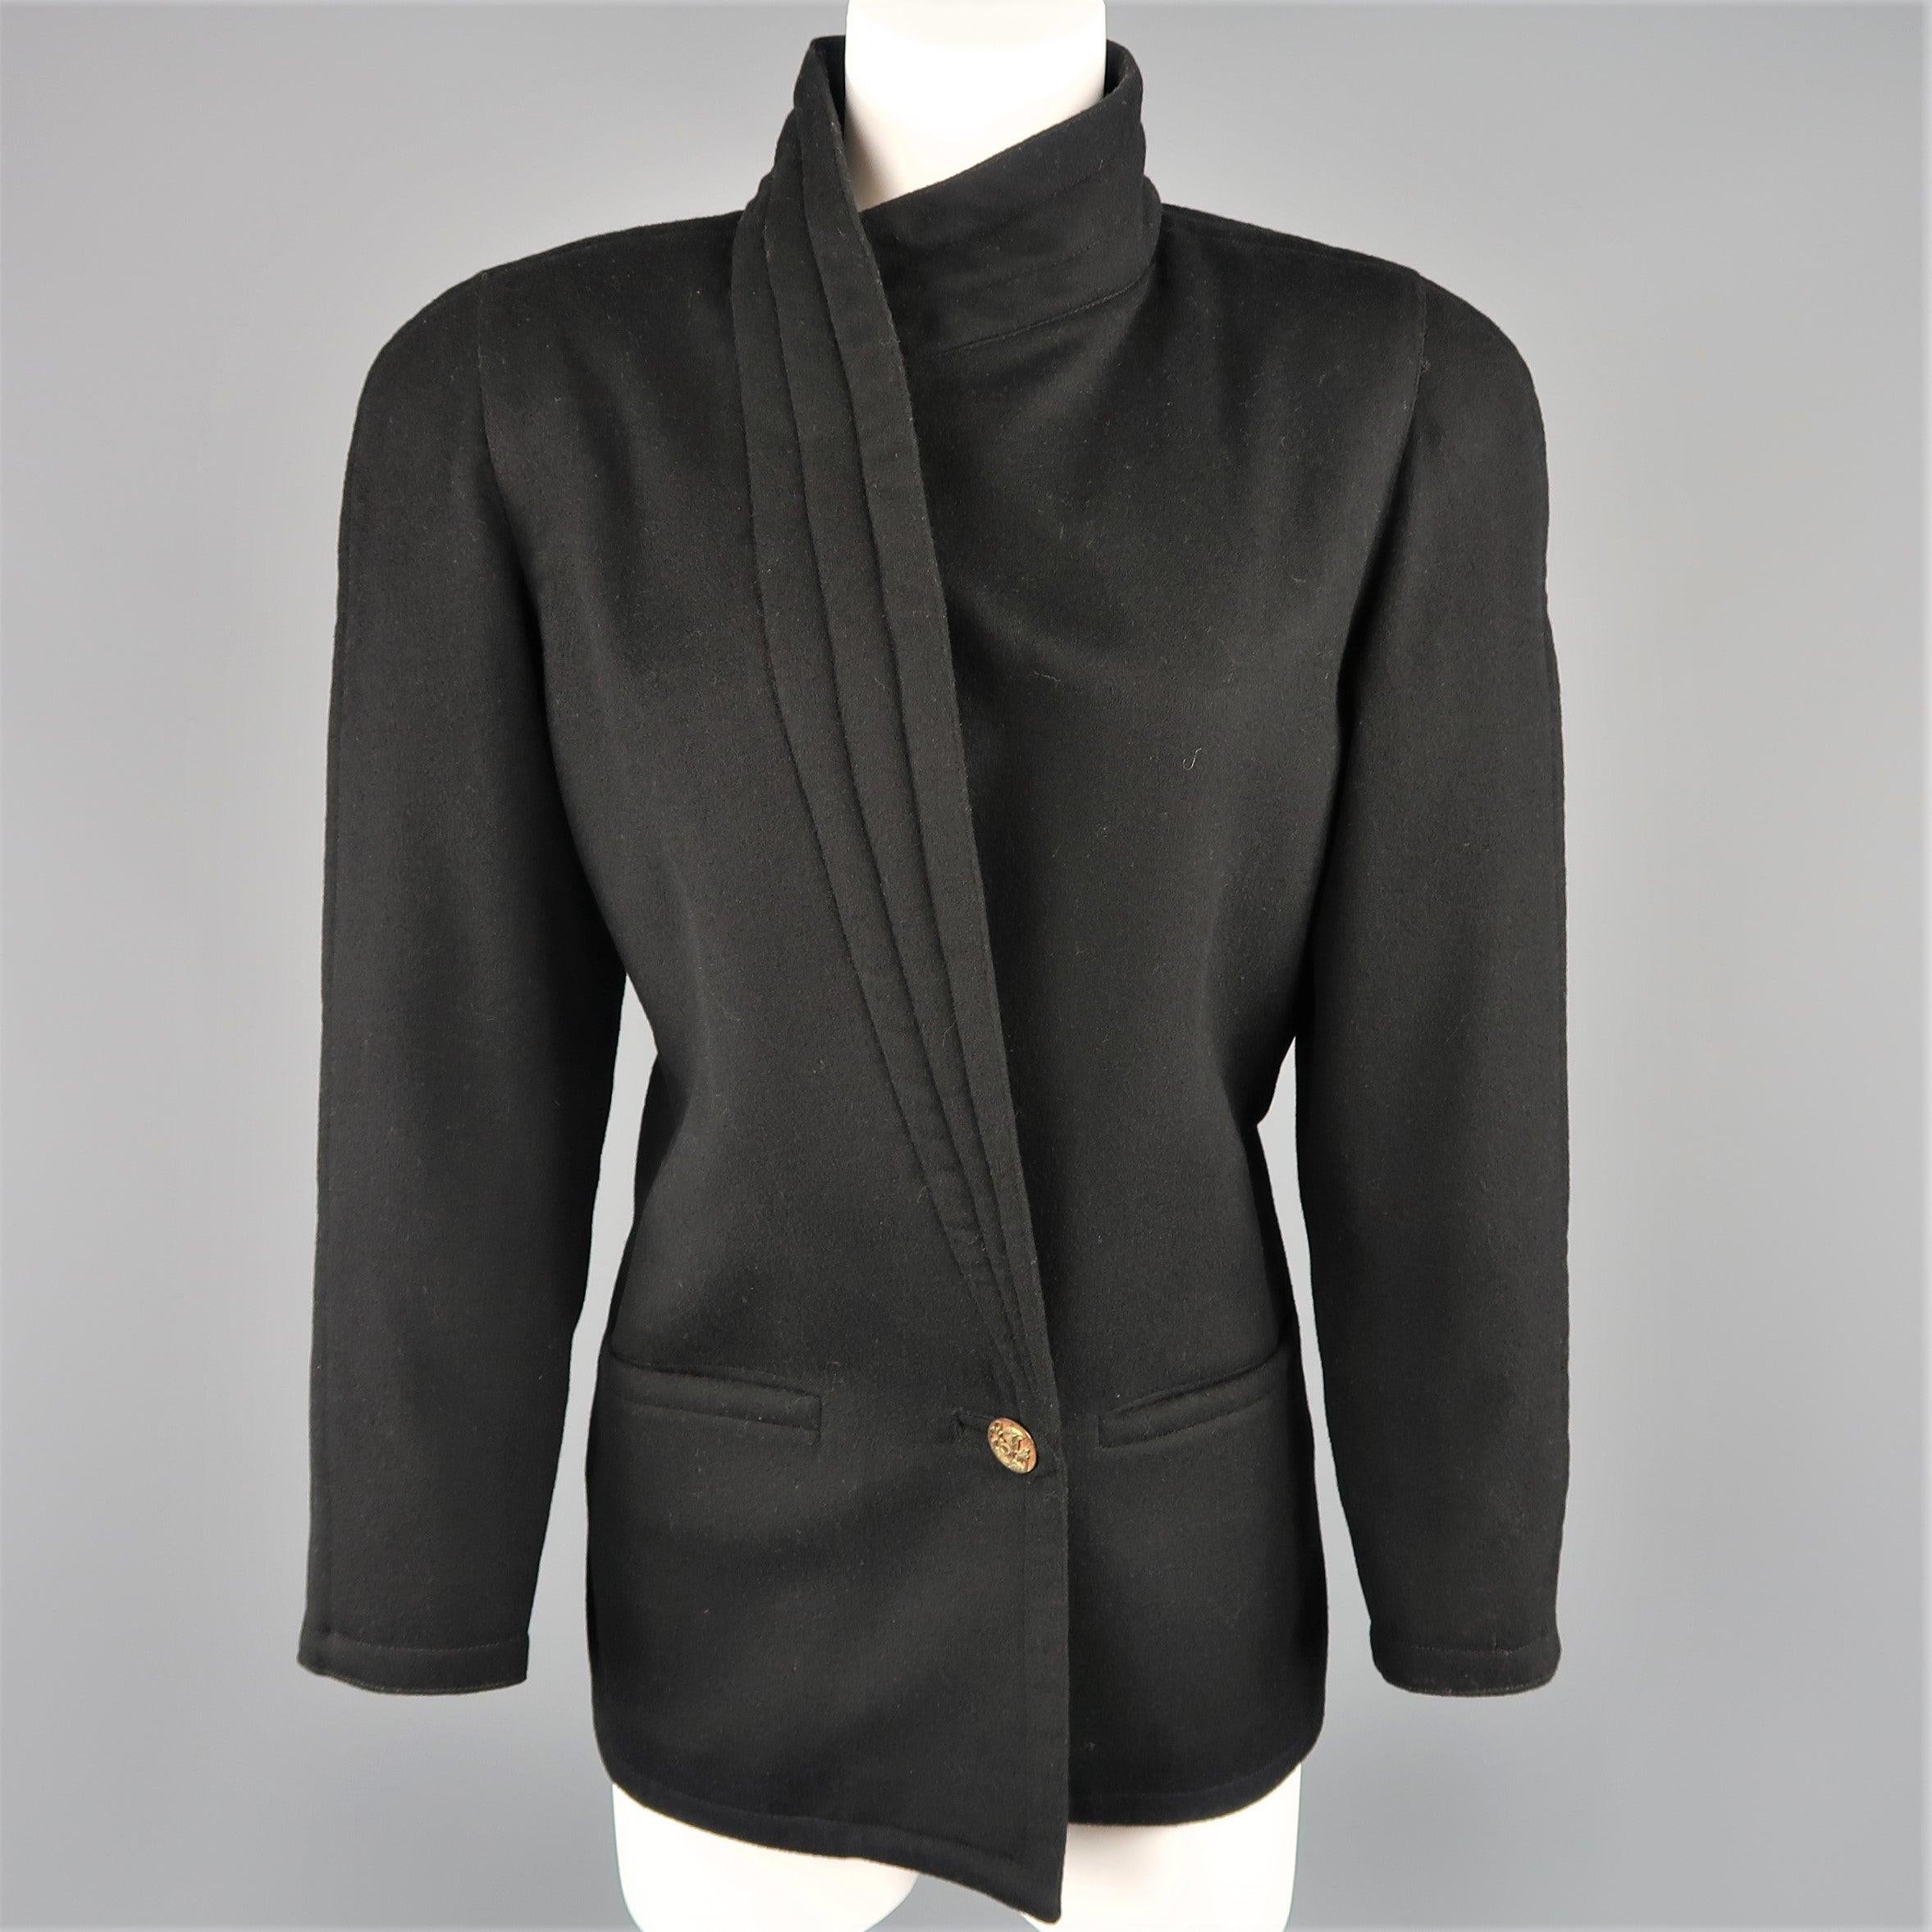 Vintage 1980s GIANNI VERSACE Size 8 Black Wrap Collar Coat In Good Condition For Sale In San Francisco, CA